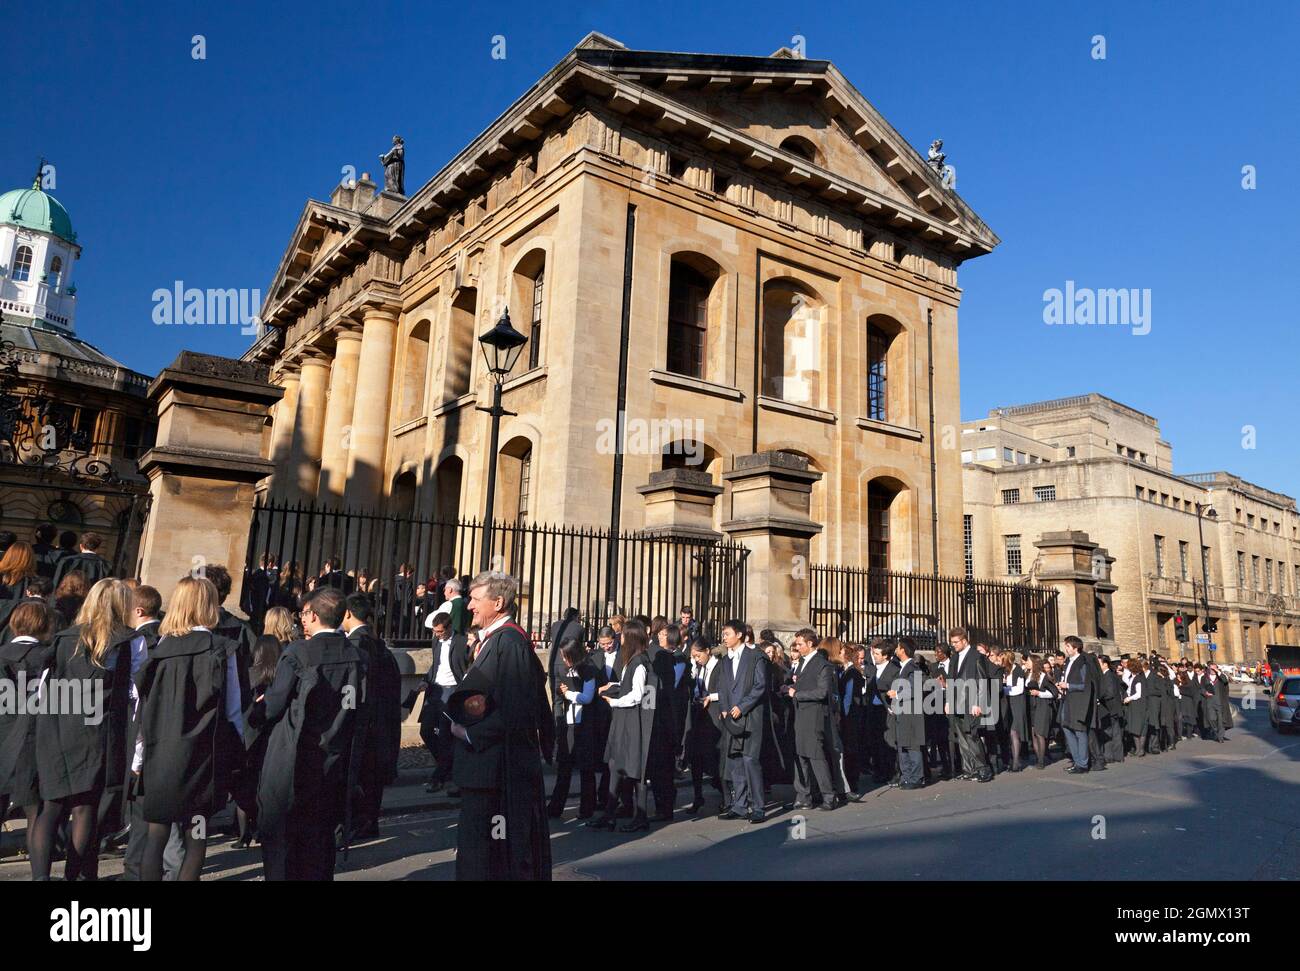 Oxford, England - 2018; Every year there is a matriculation ceremony for students of Oxford University, complete with pomp, ritual and much joy. Here Stock Photo